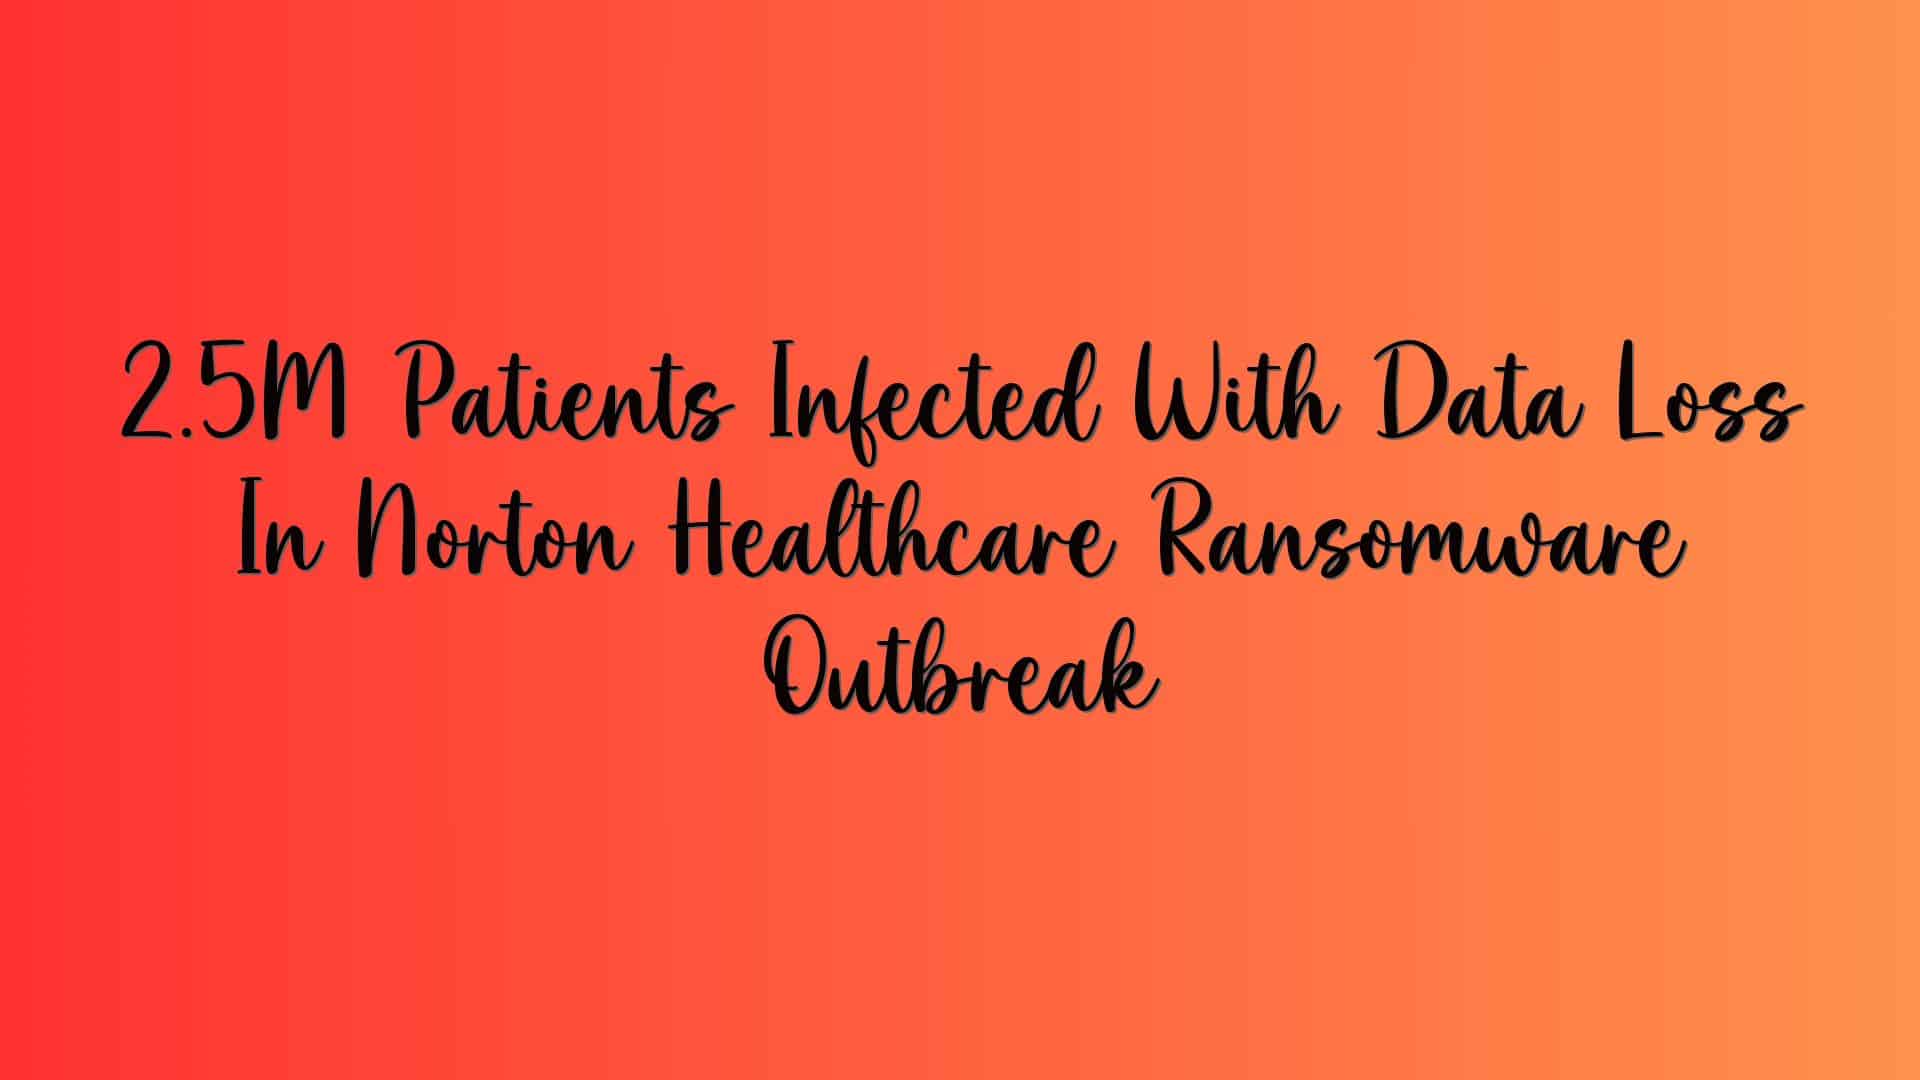 2.5M Patients Infected With Data Loss In Norton Healthcare Ransomware Outbreak